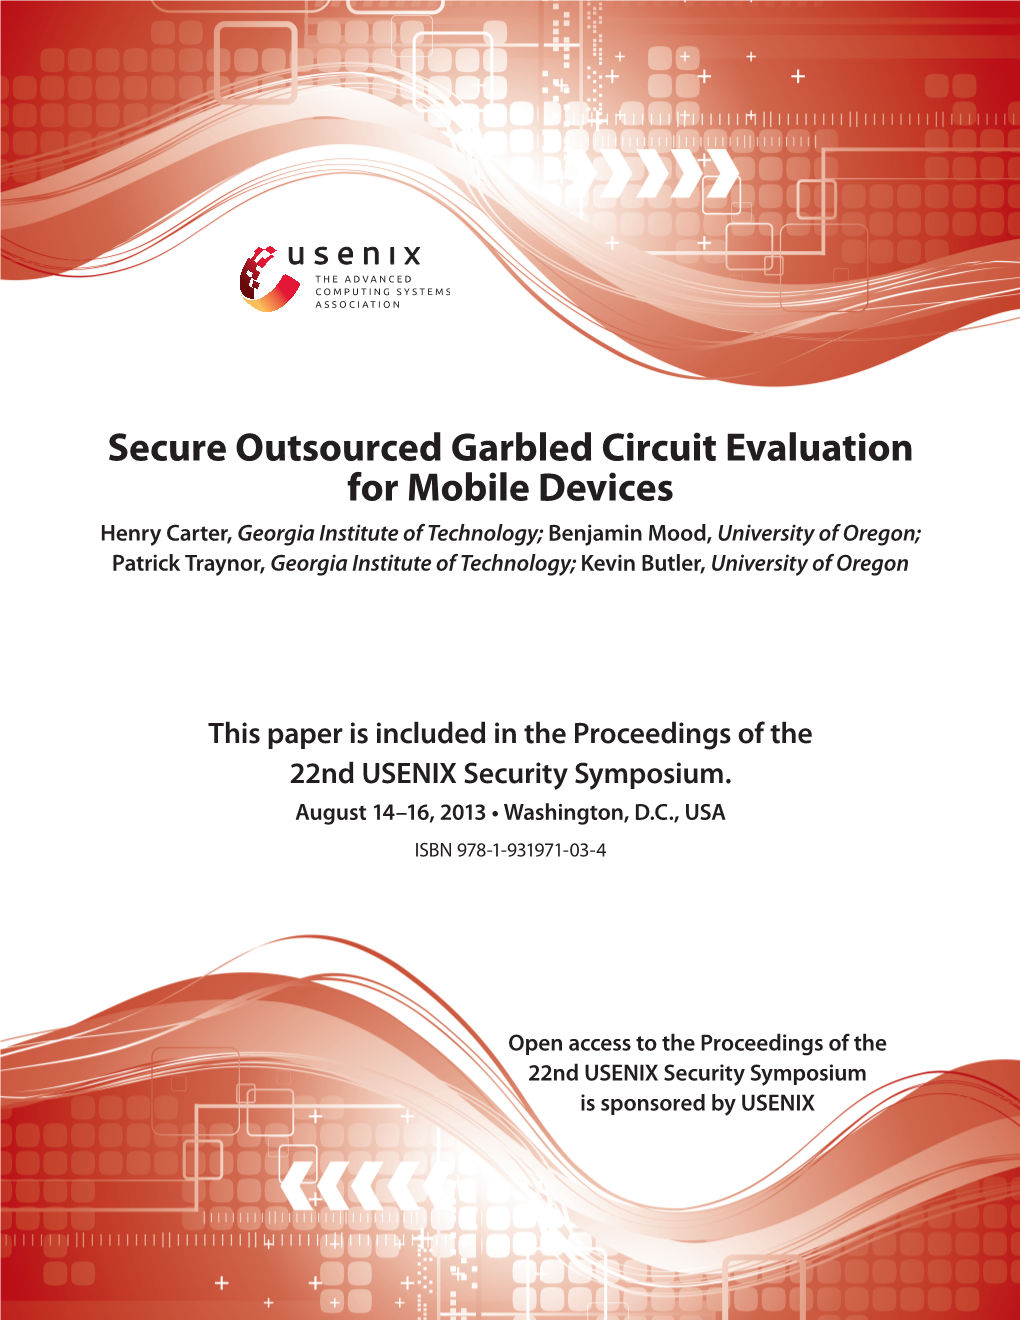 Secure Outsourced Garbled Circuit Evaluation for Mobile Devices